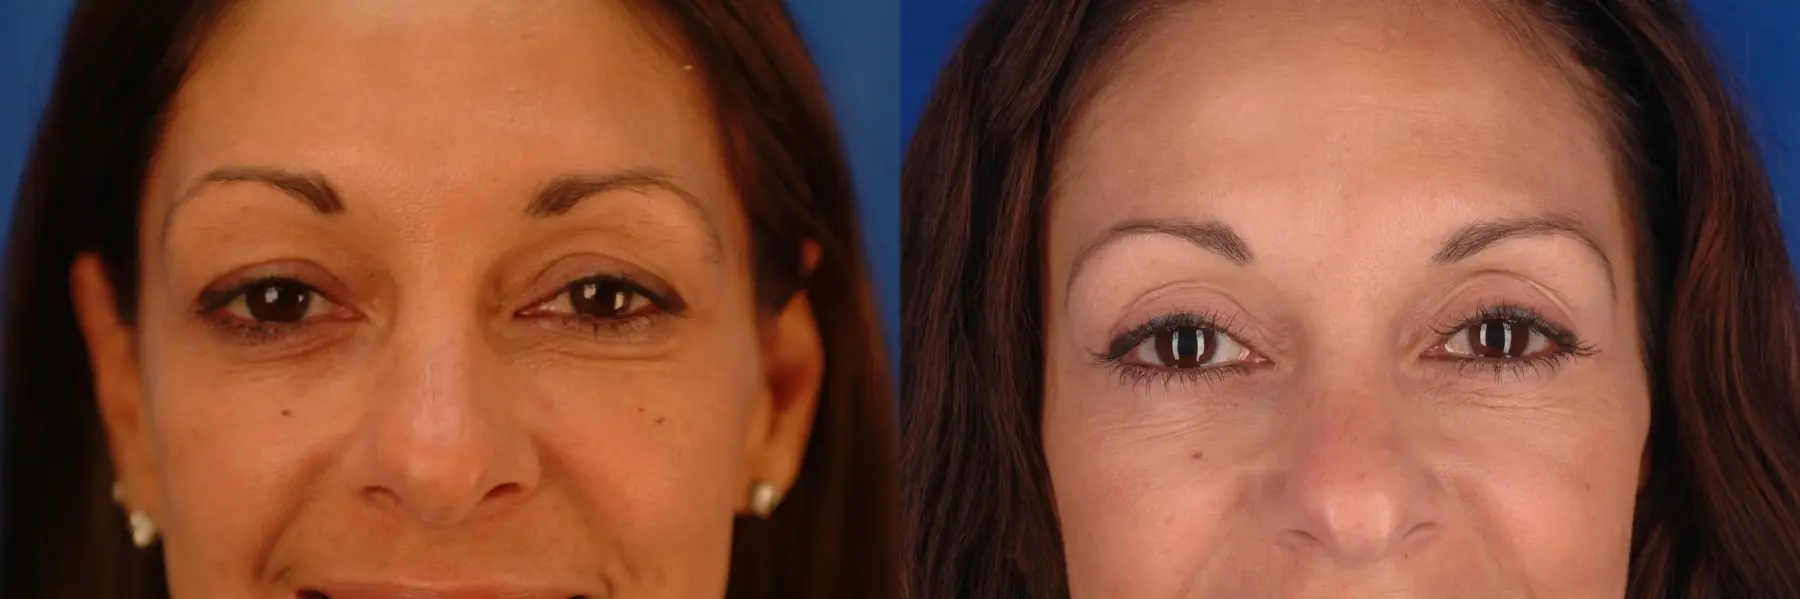 49 year old woman, four lid blepharoplasty - Before and After